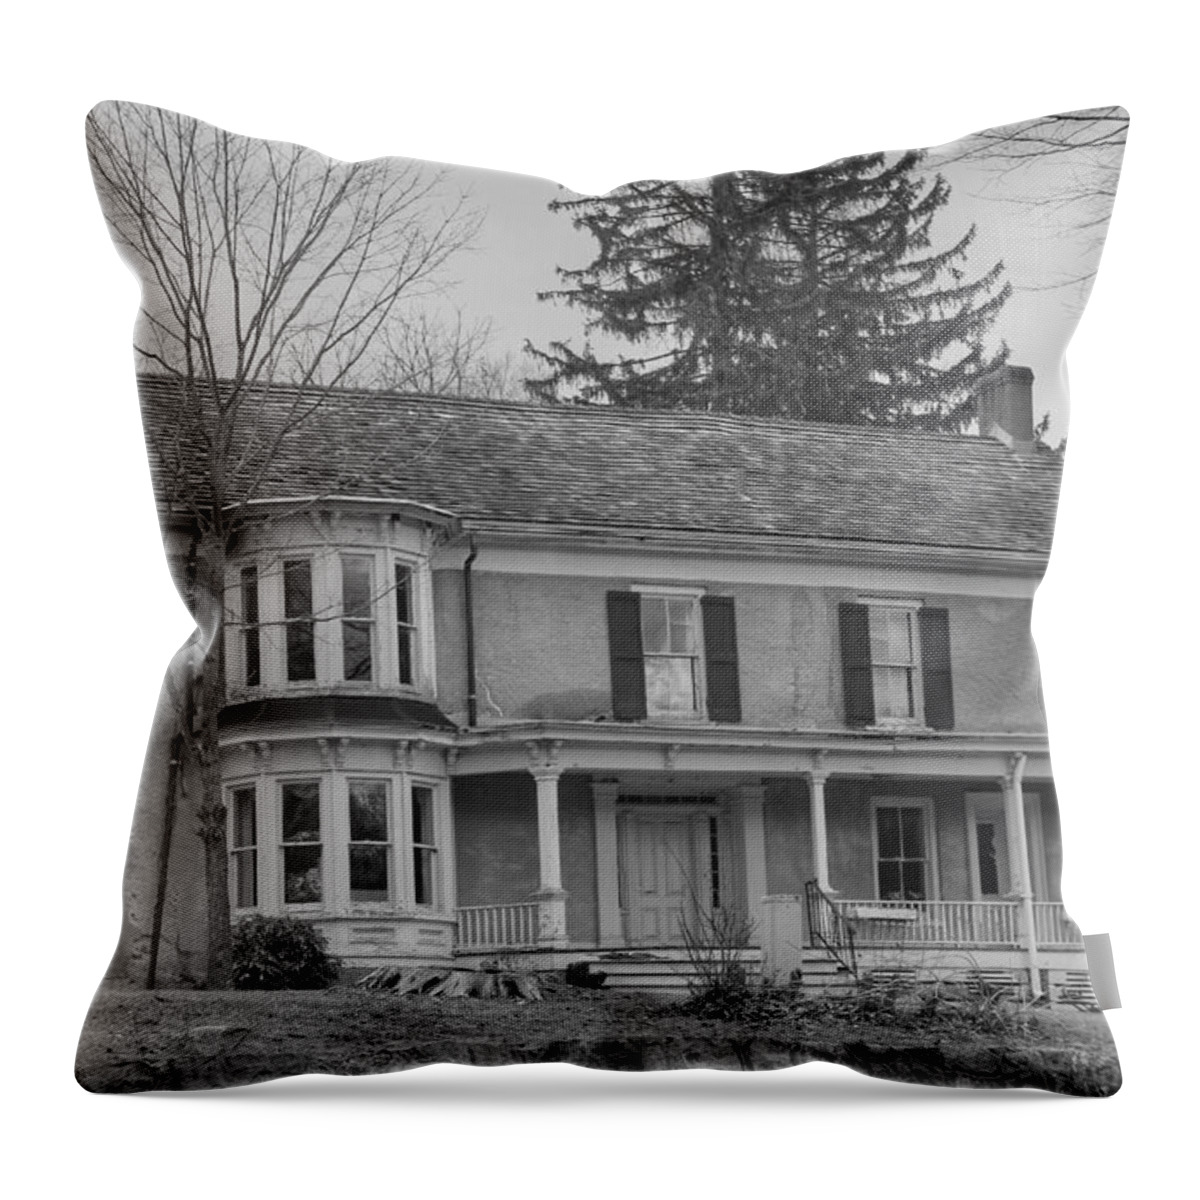 Waterloo Village Throw Pillow featuring the photograph Historic Mansion With Towers - Waterloo Village by Christopher Lotito